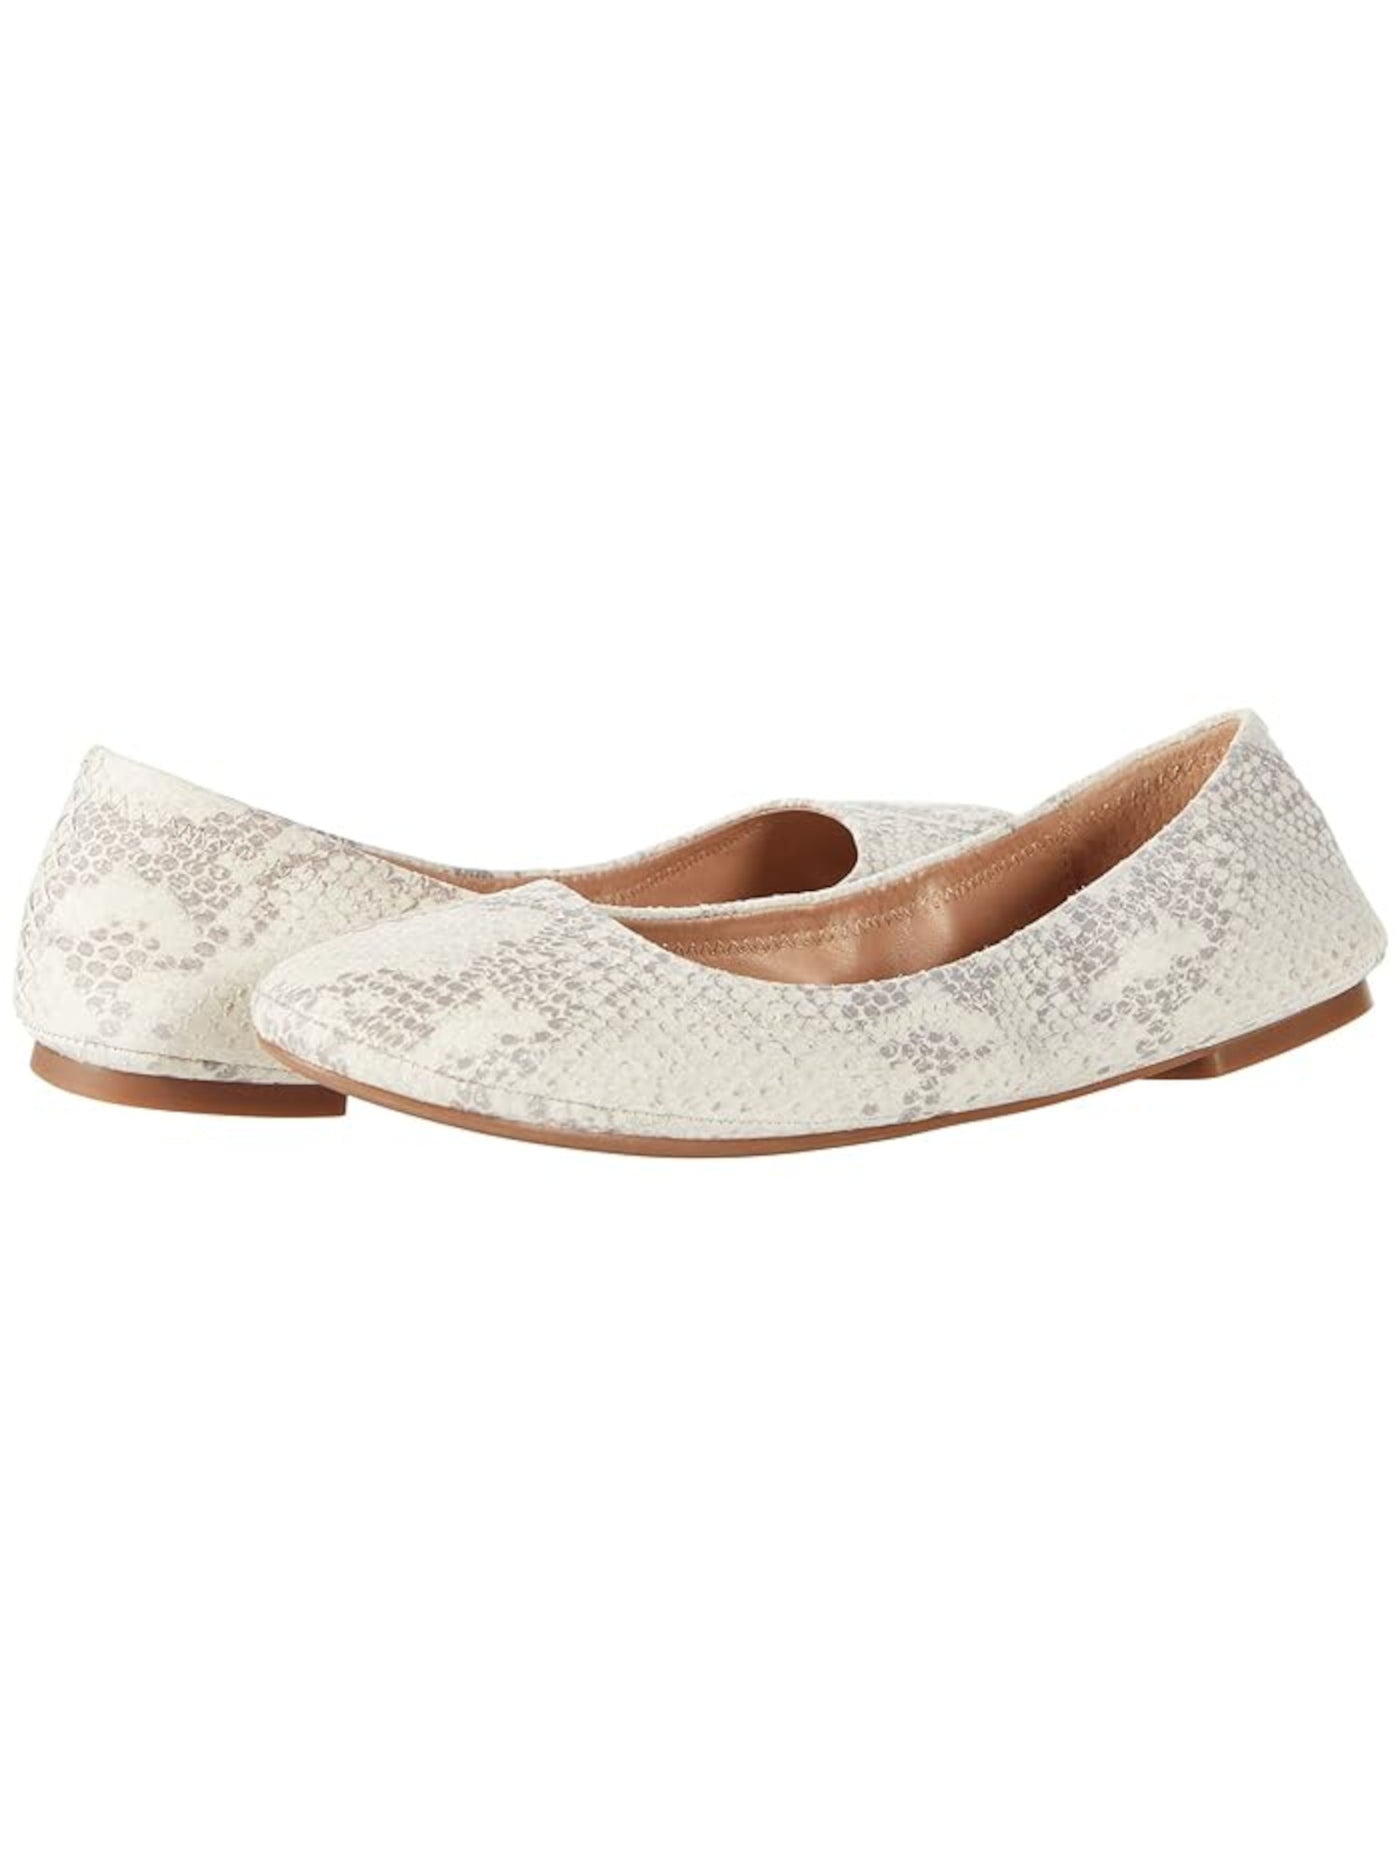 LUCKY BRAND Womens Beige Snake Print Elastic Top Line Cushioned Emmie Round Toe Slip On Leather Ballet Flats 11 M